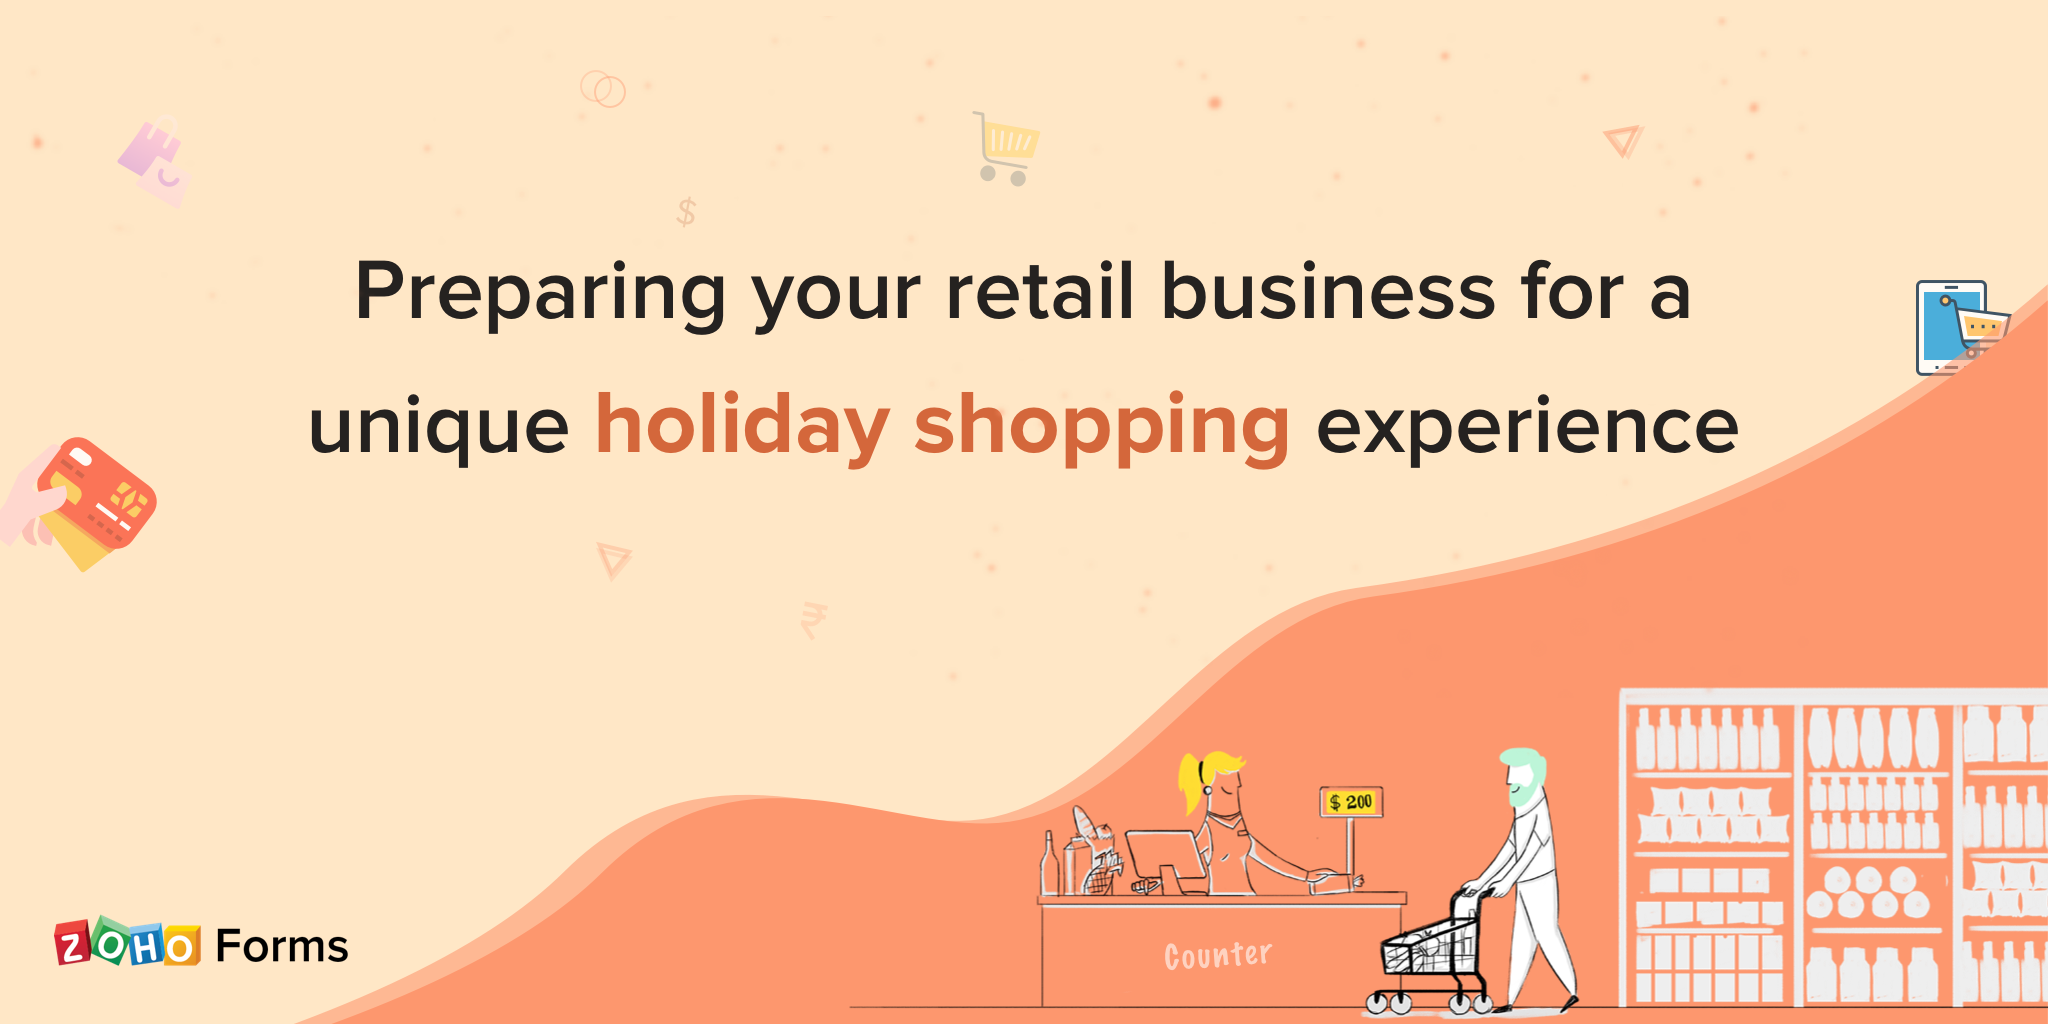 Preparing your retail business for a unique holiday shopping experience in 2020